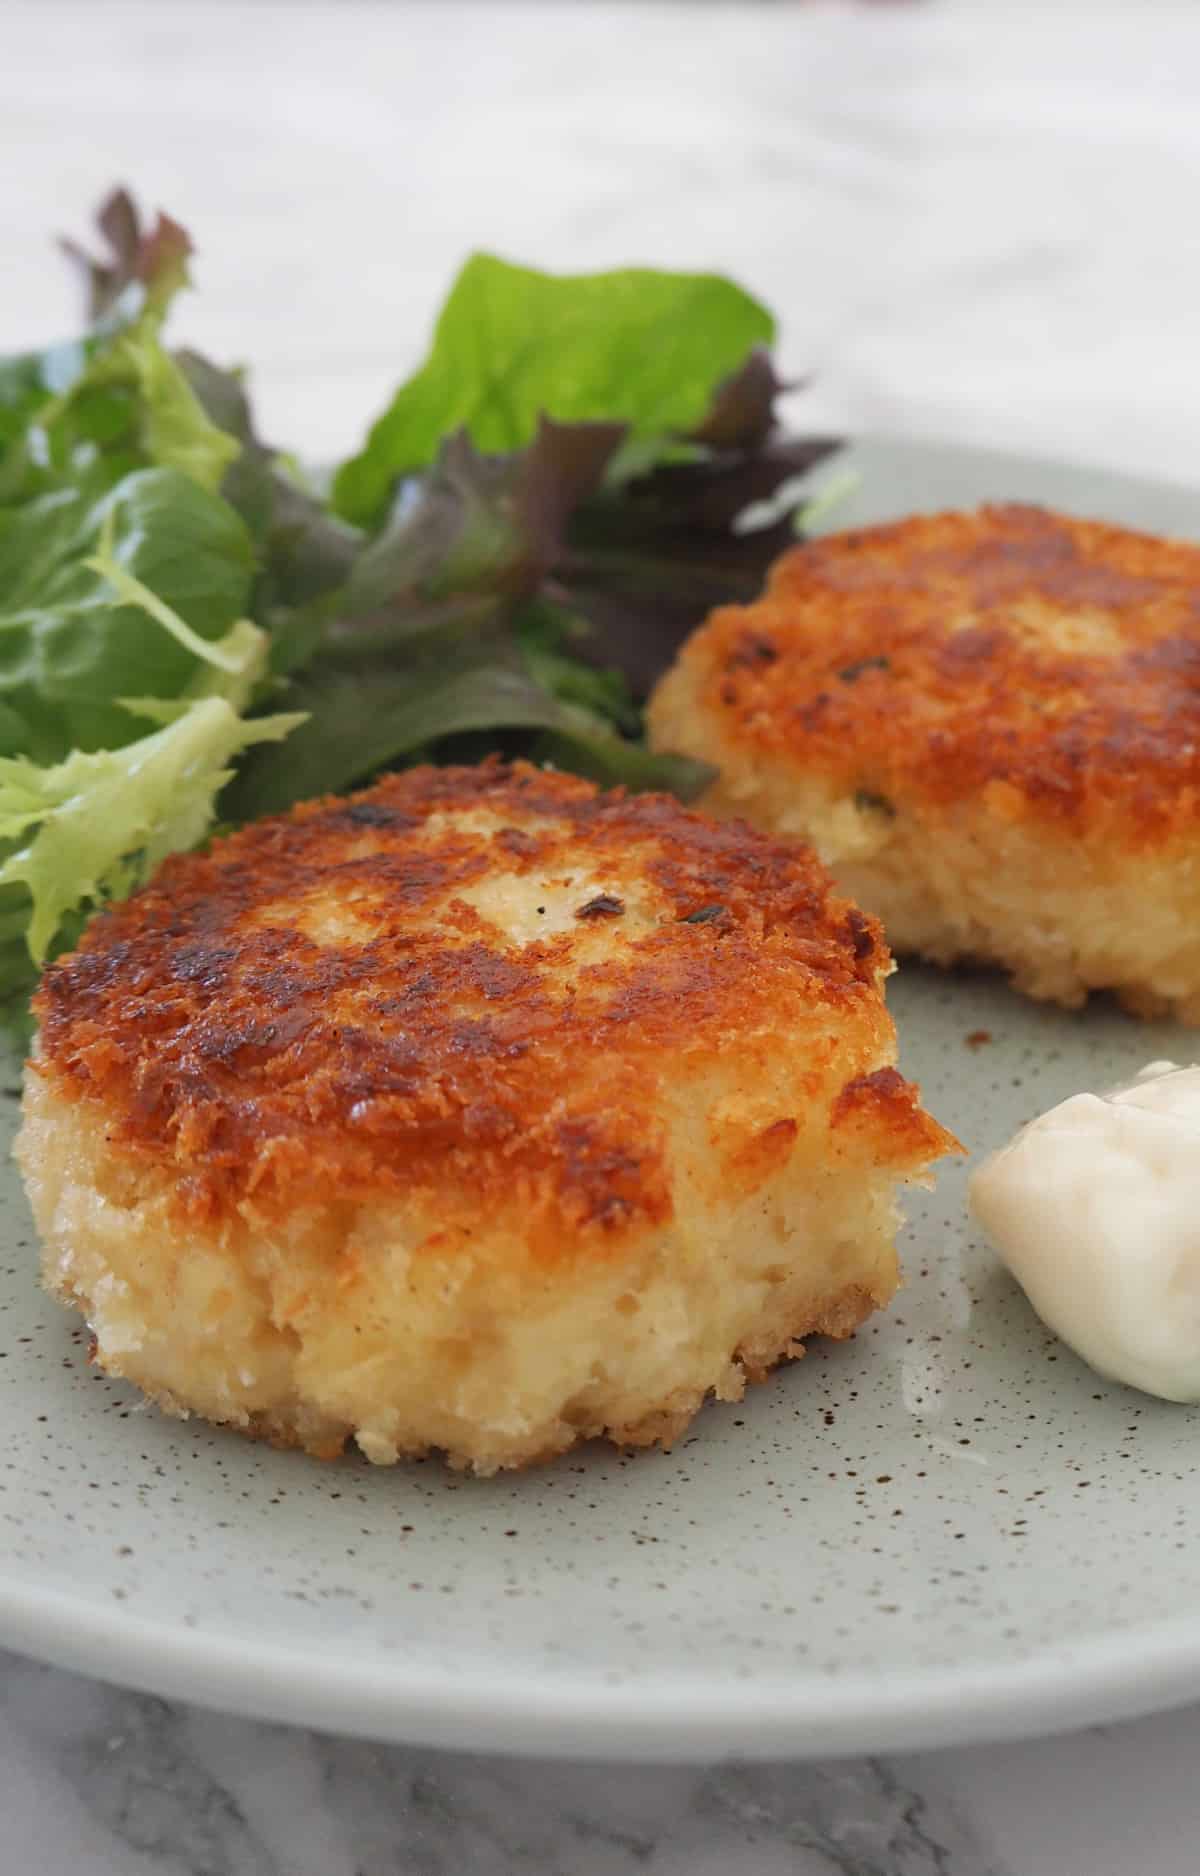 Two fish cakes on a green speckled plate. They are served with a green side salad and tartare sauce.